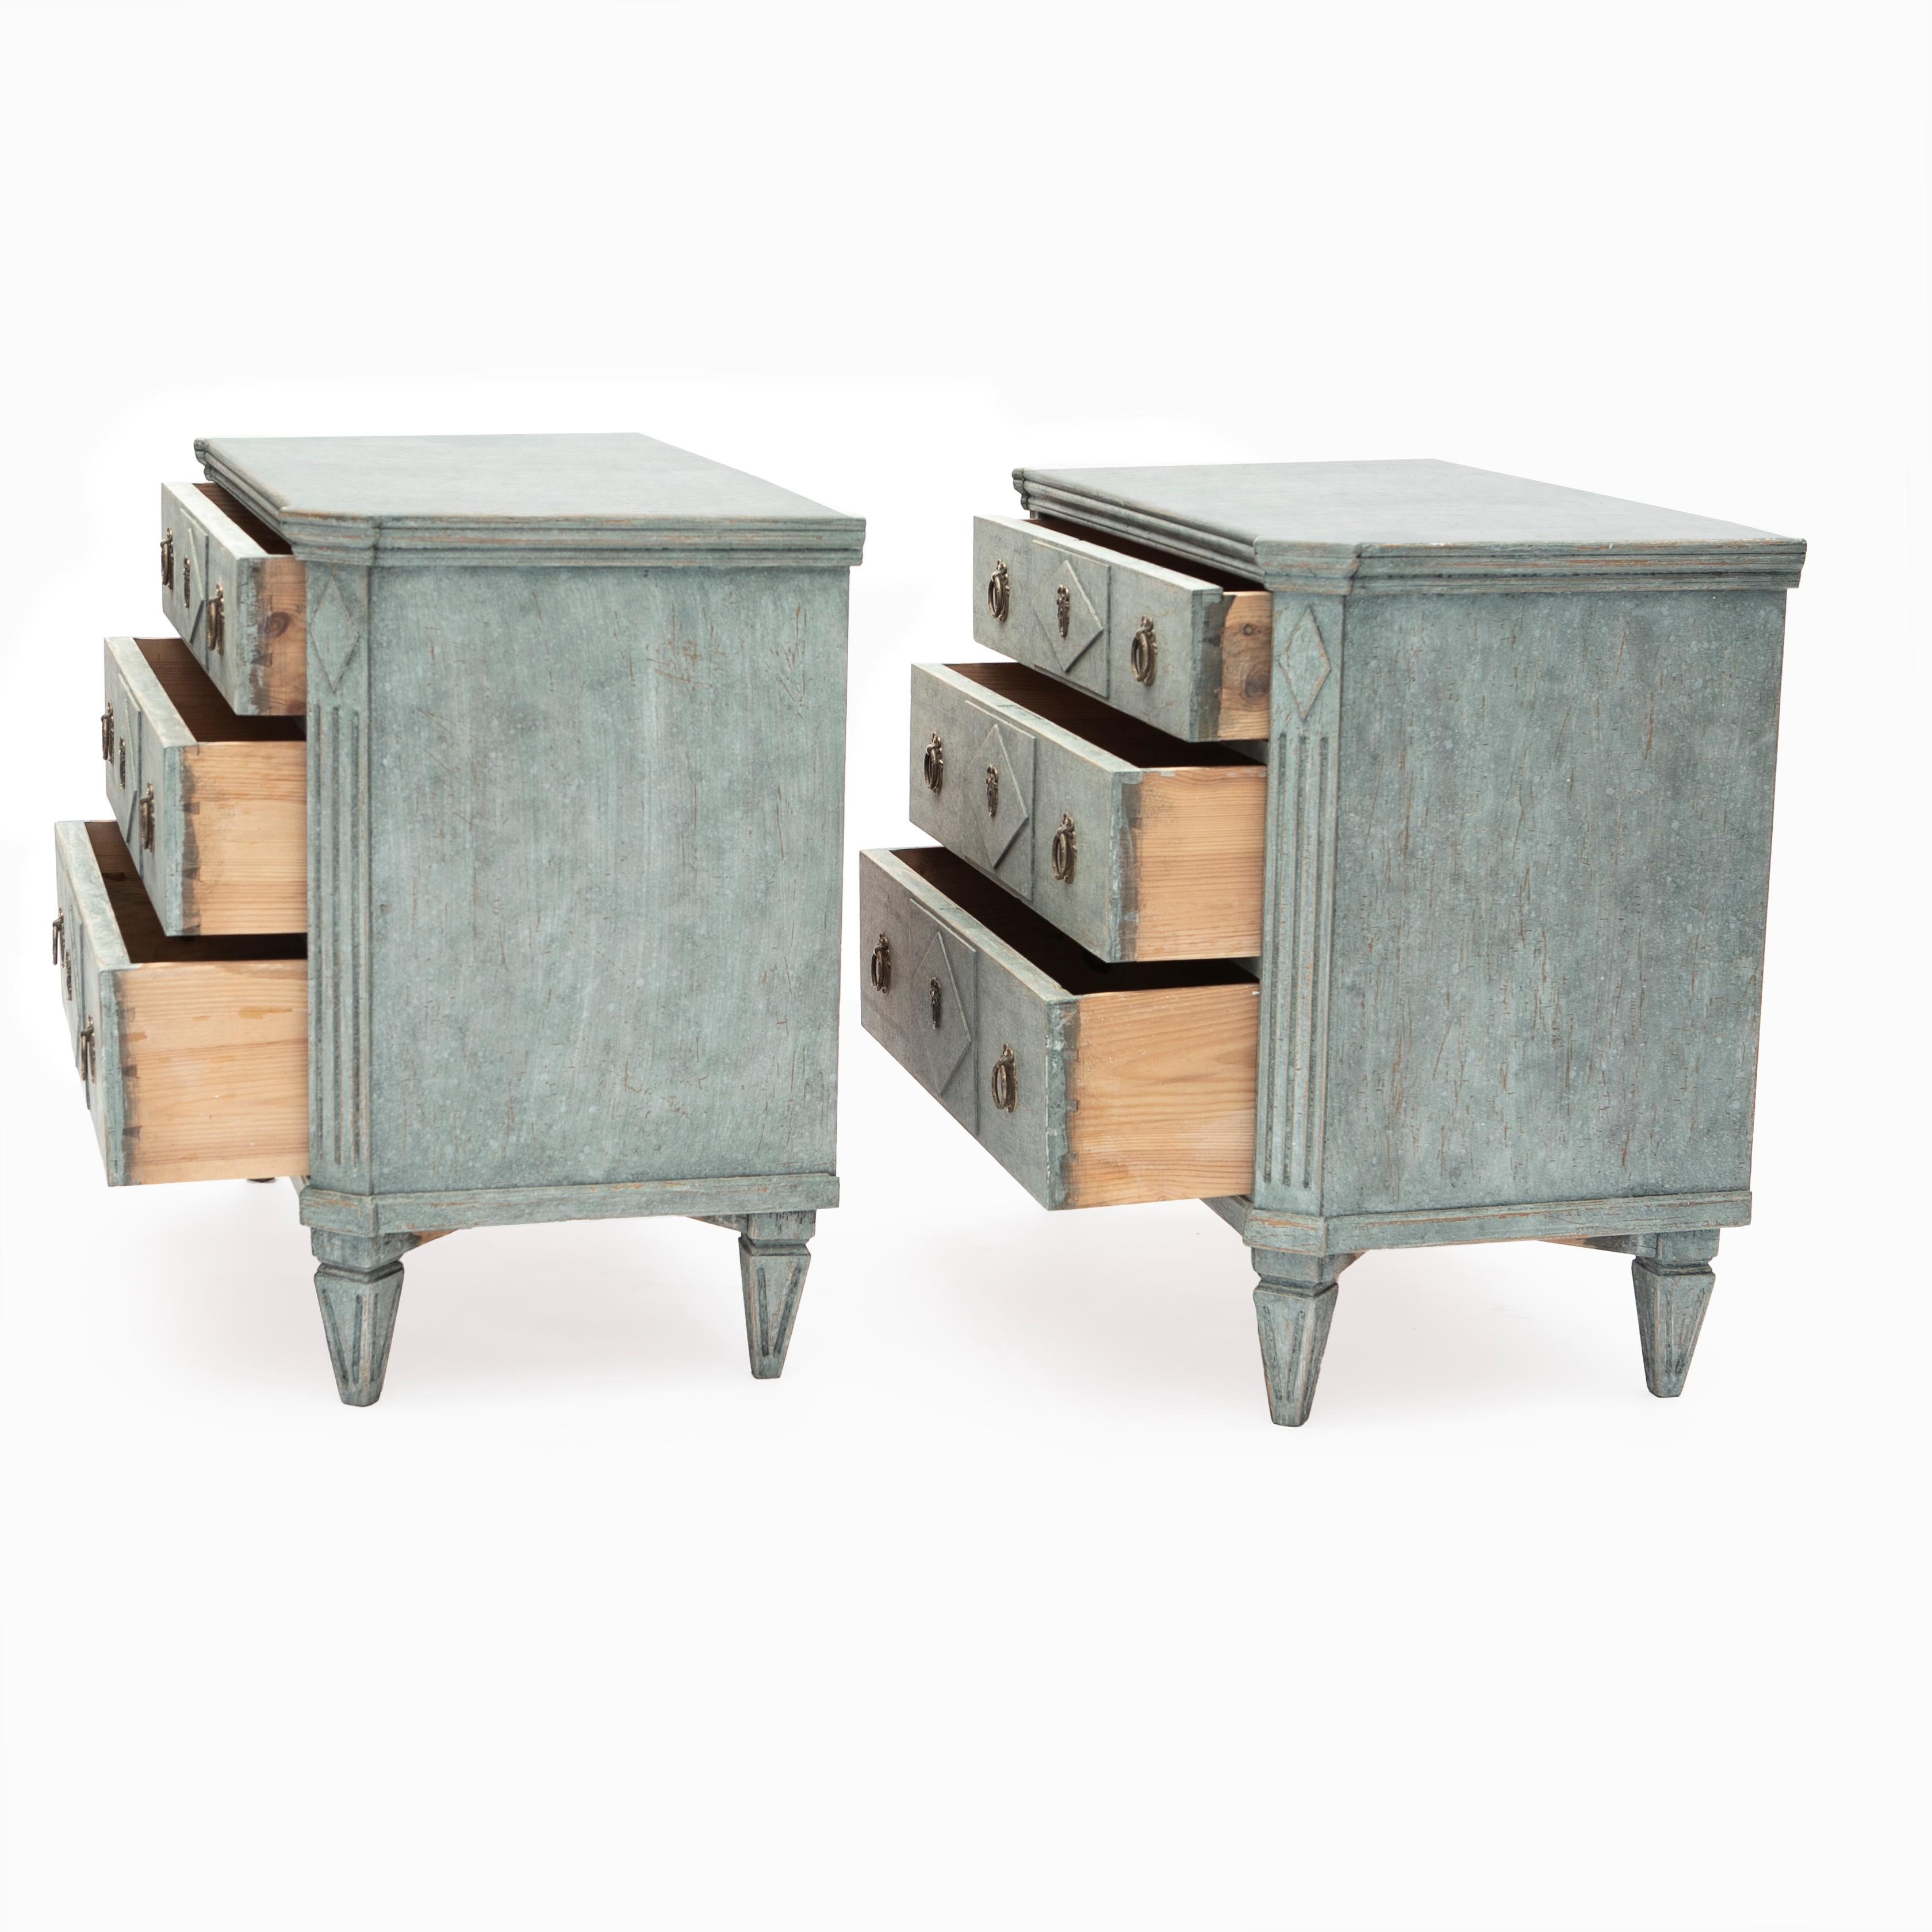 A pair of Swedish Gustavian style breakfront chest of three drawers, dating from the 19th century, painted in a light blue-green color scheme.

Each chest features a top with canted corners sitting above a front with three break drawers adorned